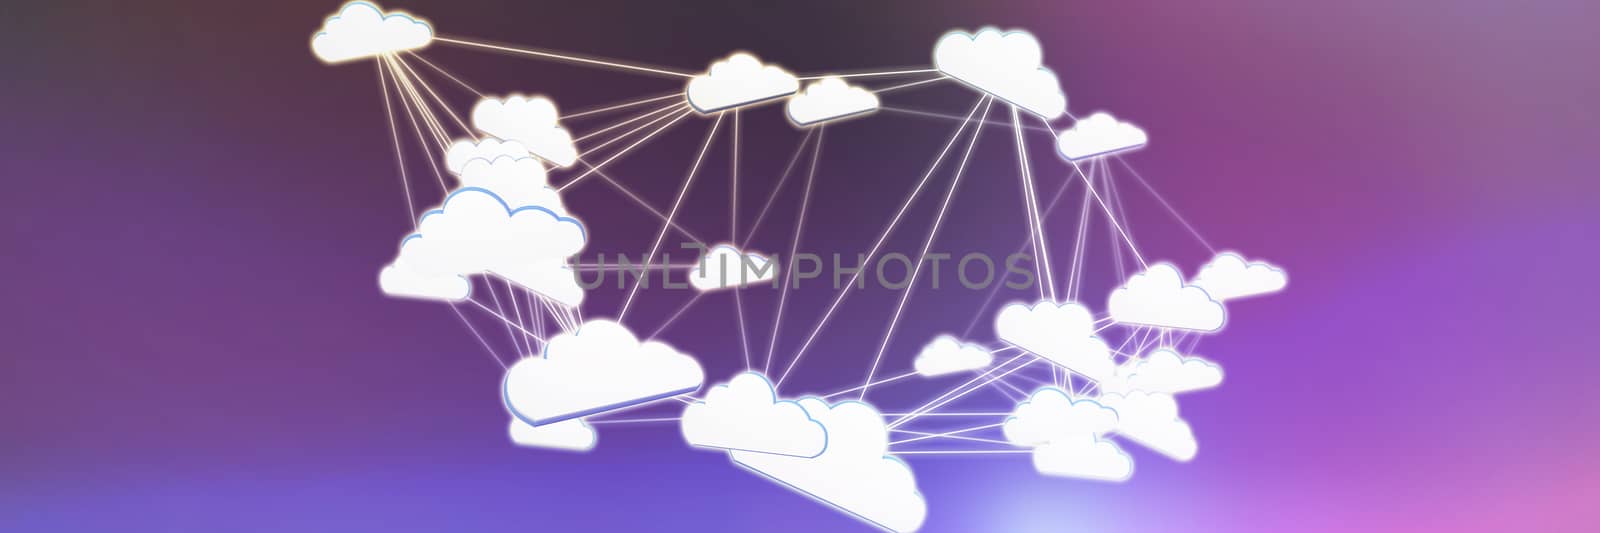 Composite image of abstract image of cloud computing symbol by Wavebreakmedia